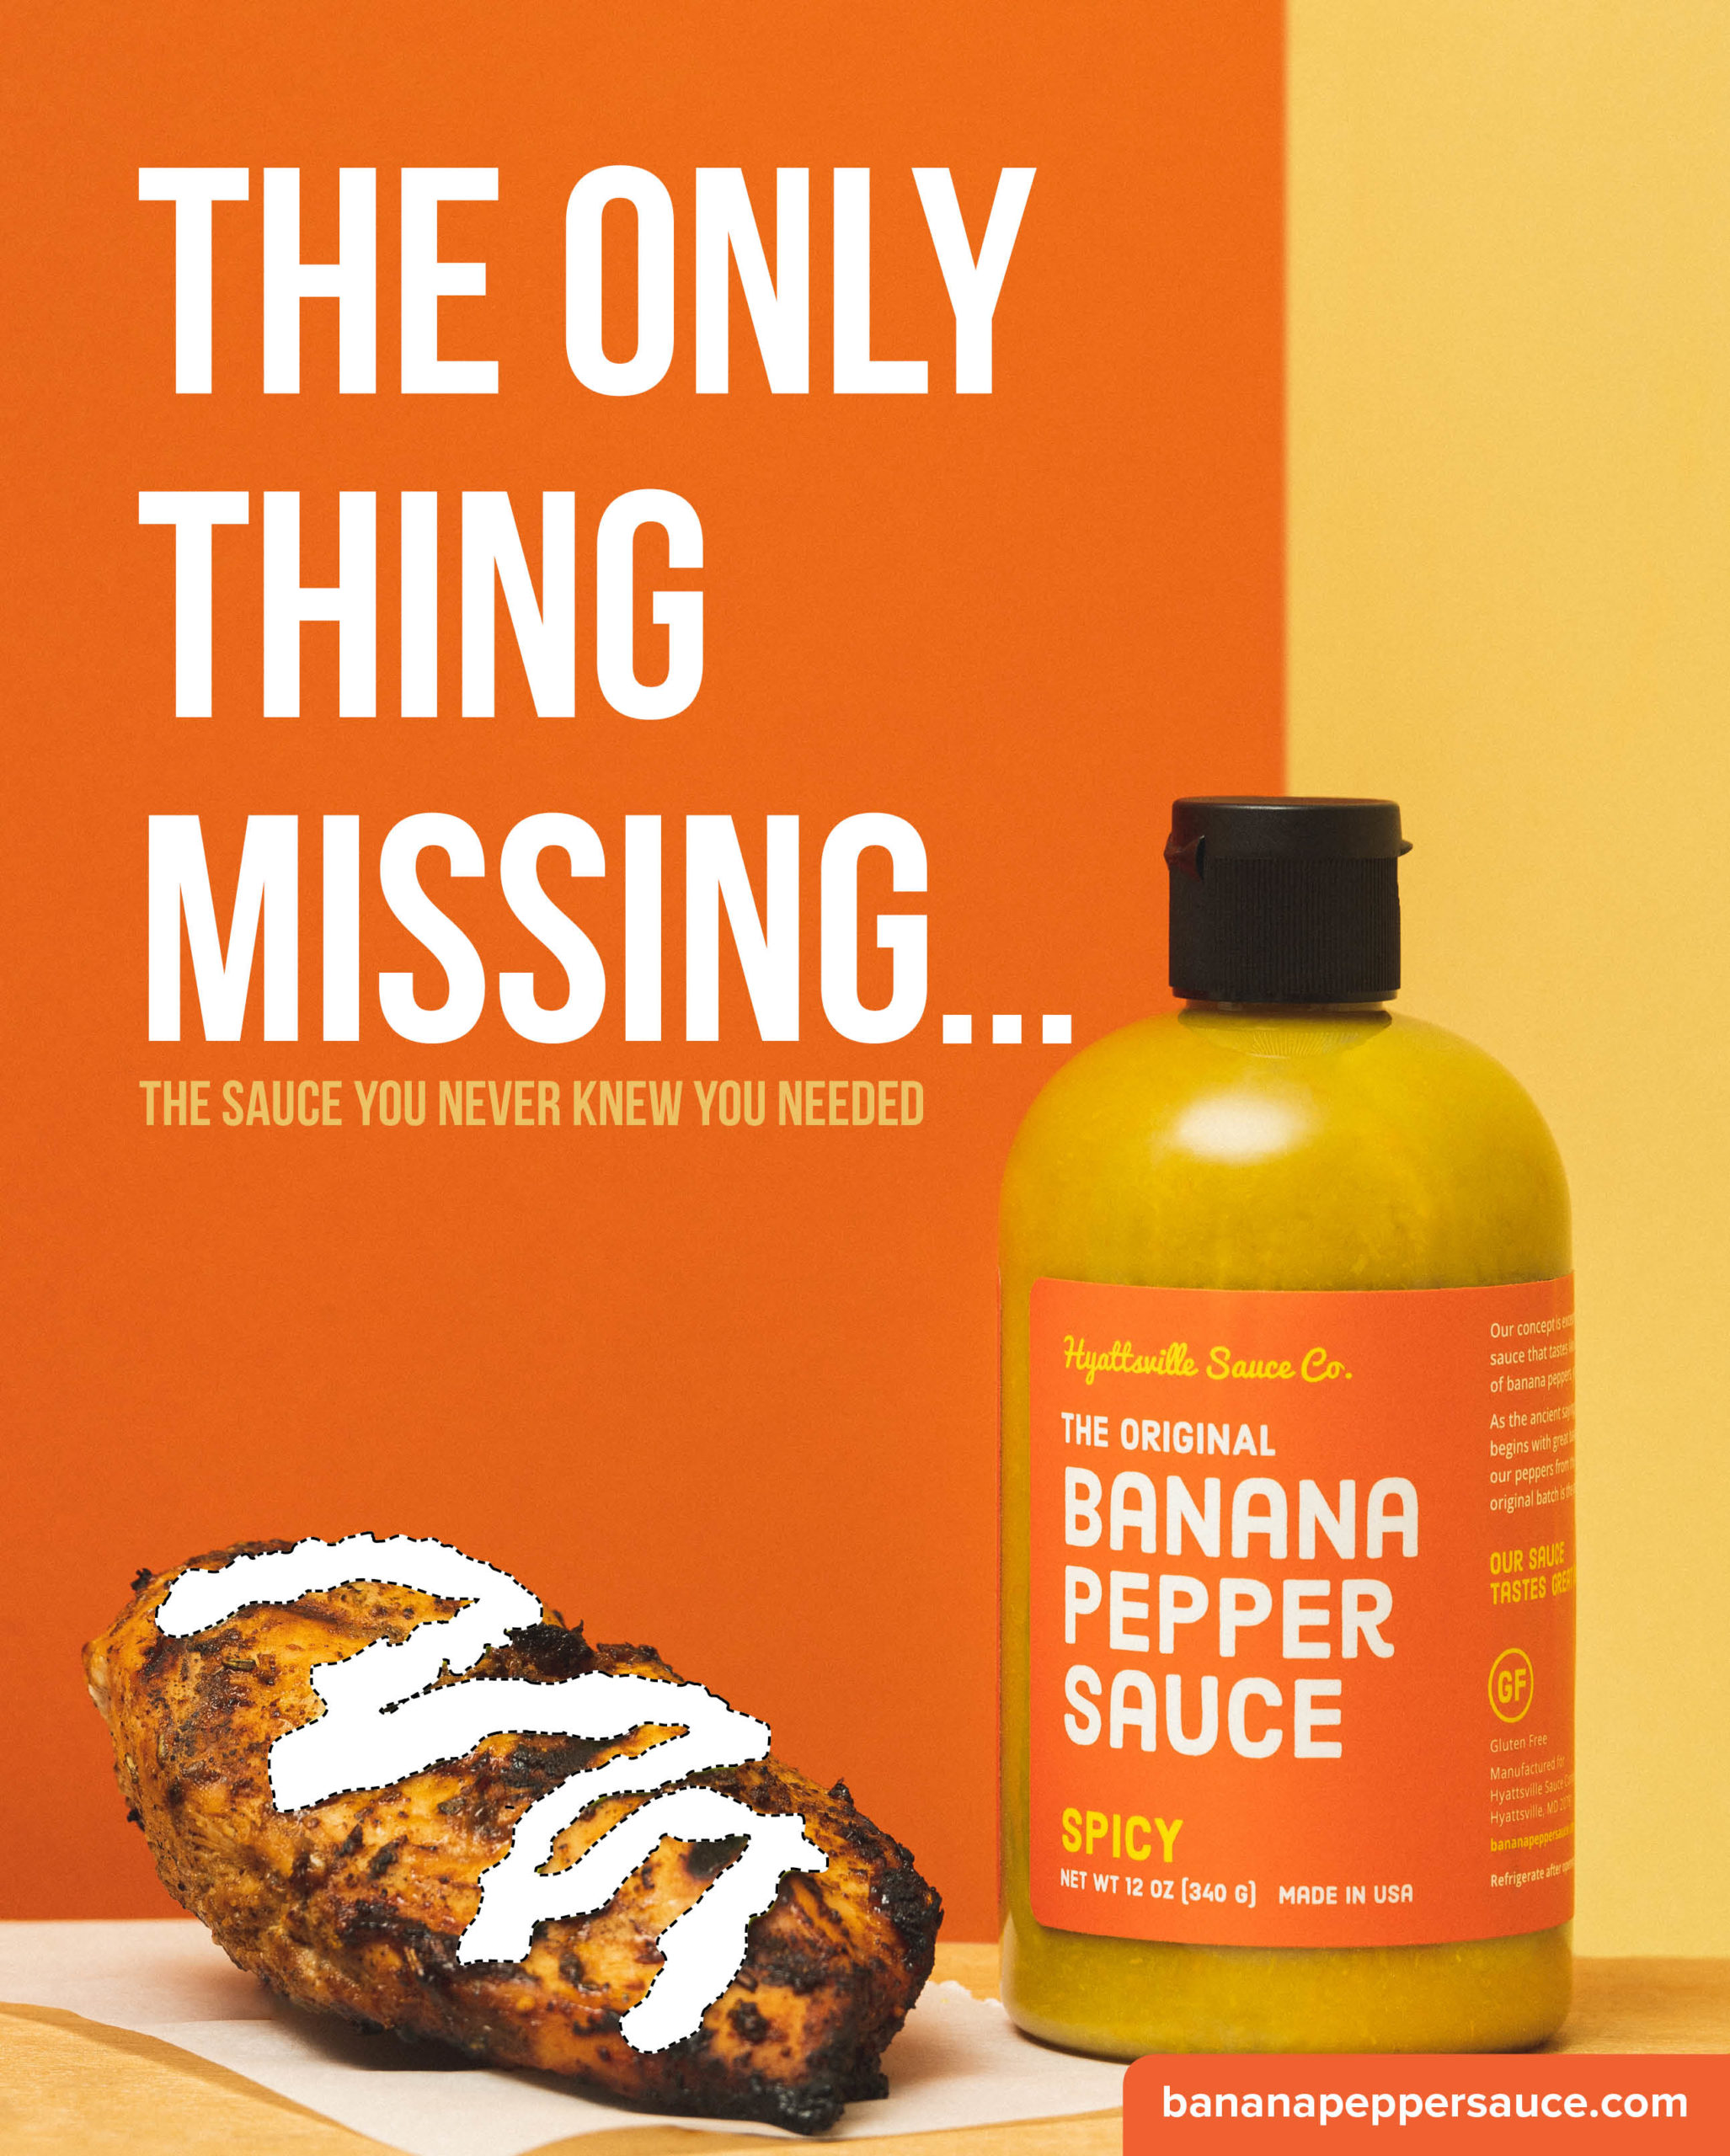 Hyattsville Sauce Company The Original Banana Pepper Sauce bottle Spicy flavor next to meat graphic with slogan and website address